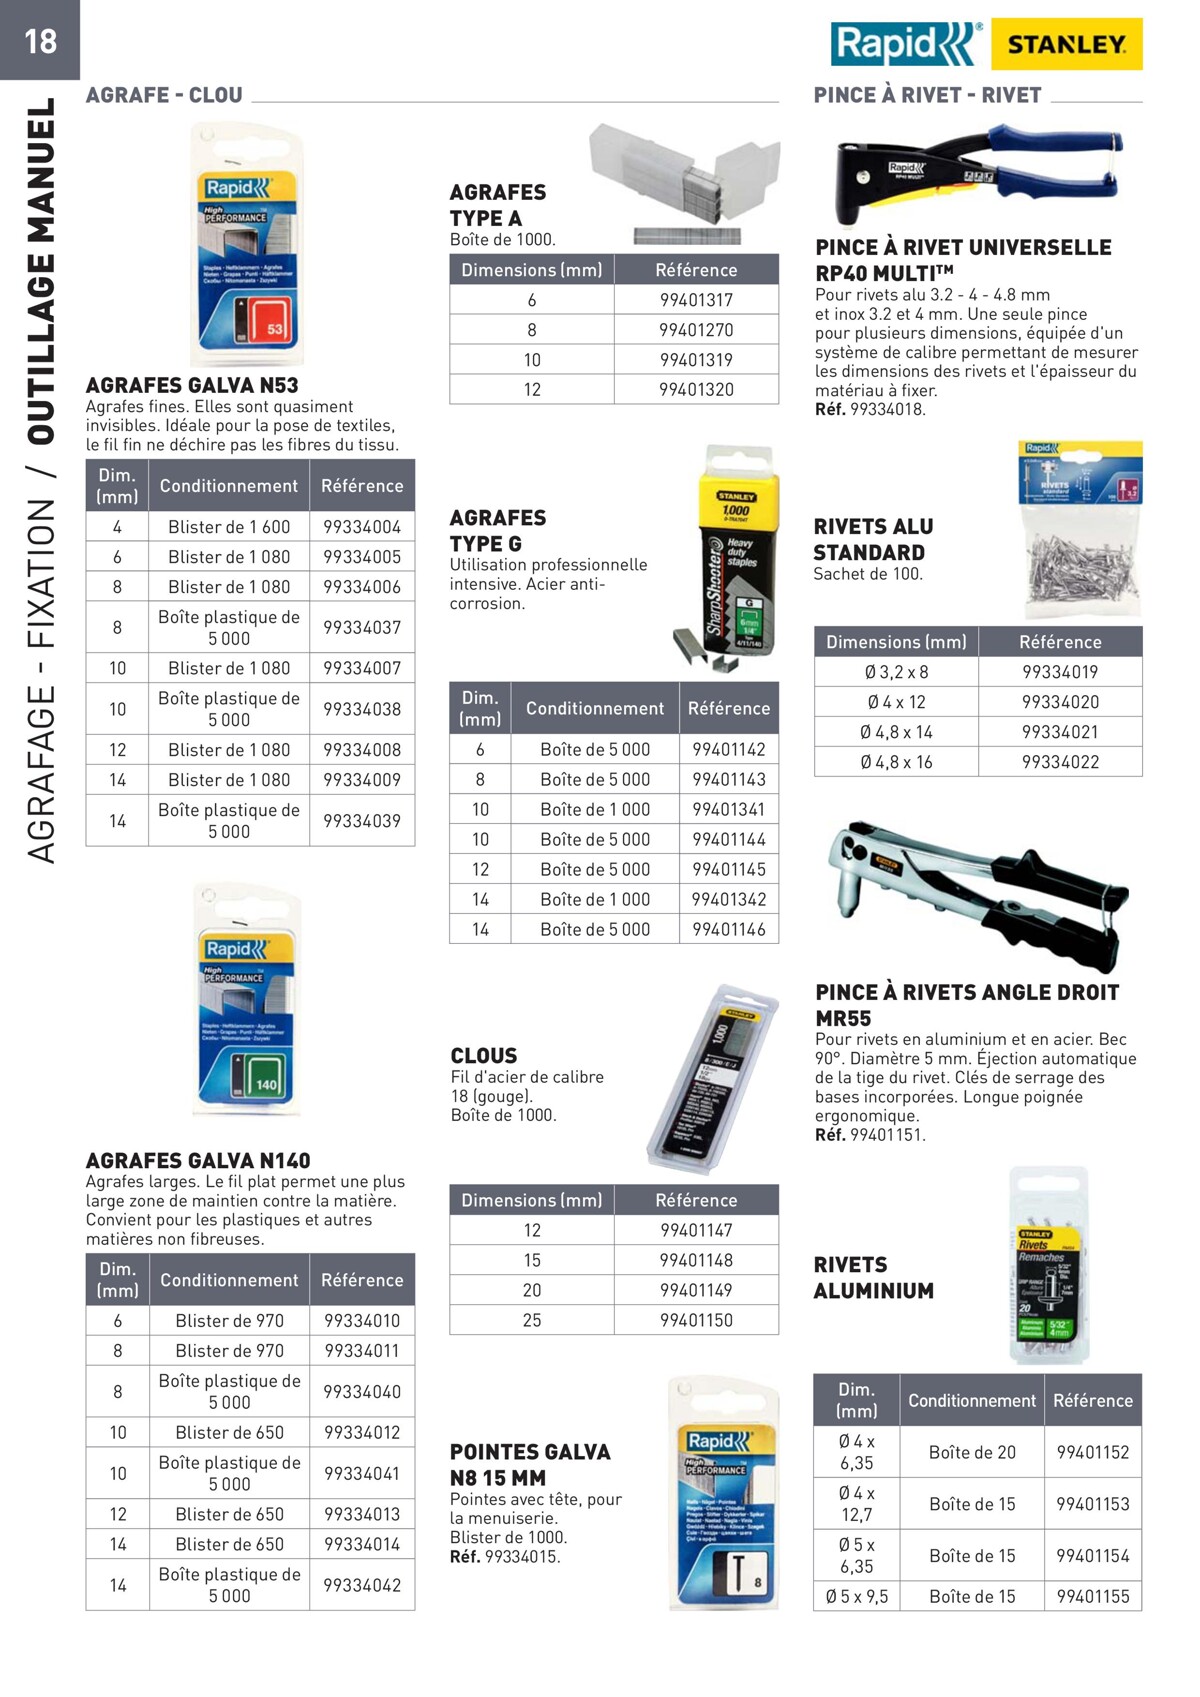 Catalogue Special Outillage et equipments, page 00018